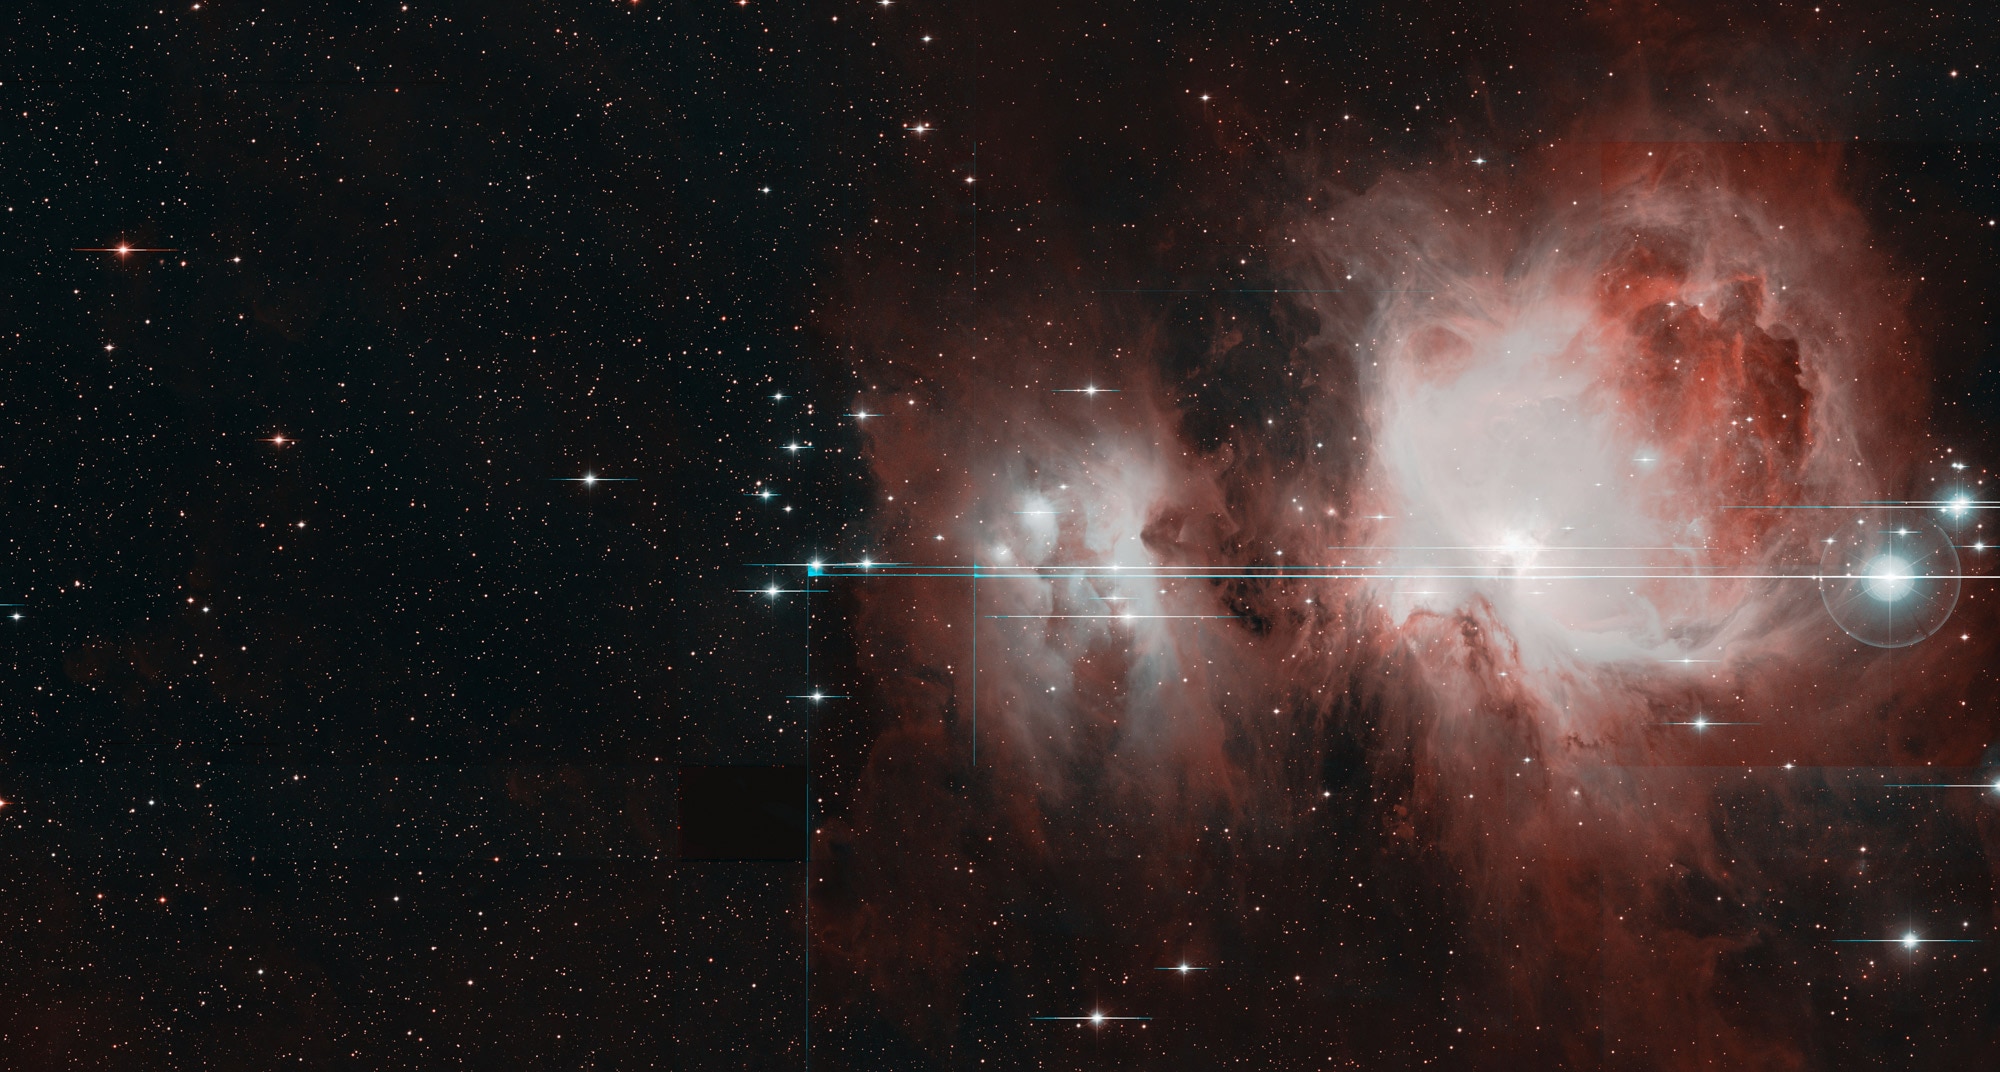 The Orion Nebula shows up in just a tiny piece of the massive Zwicky Transient Facility image of the constellation. Credit: Caltech Optical Observatories